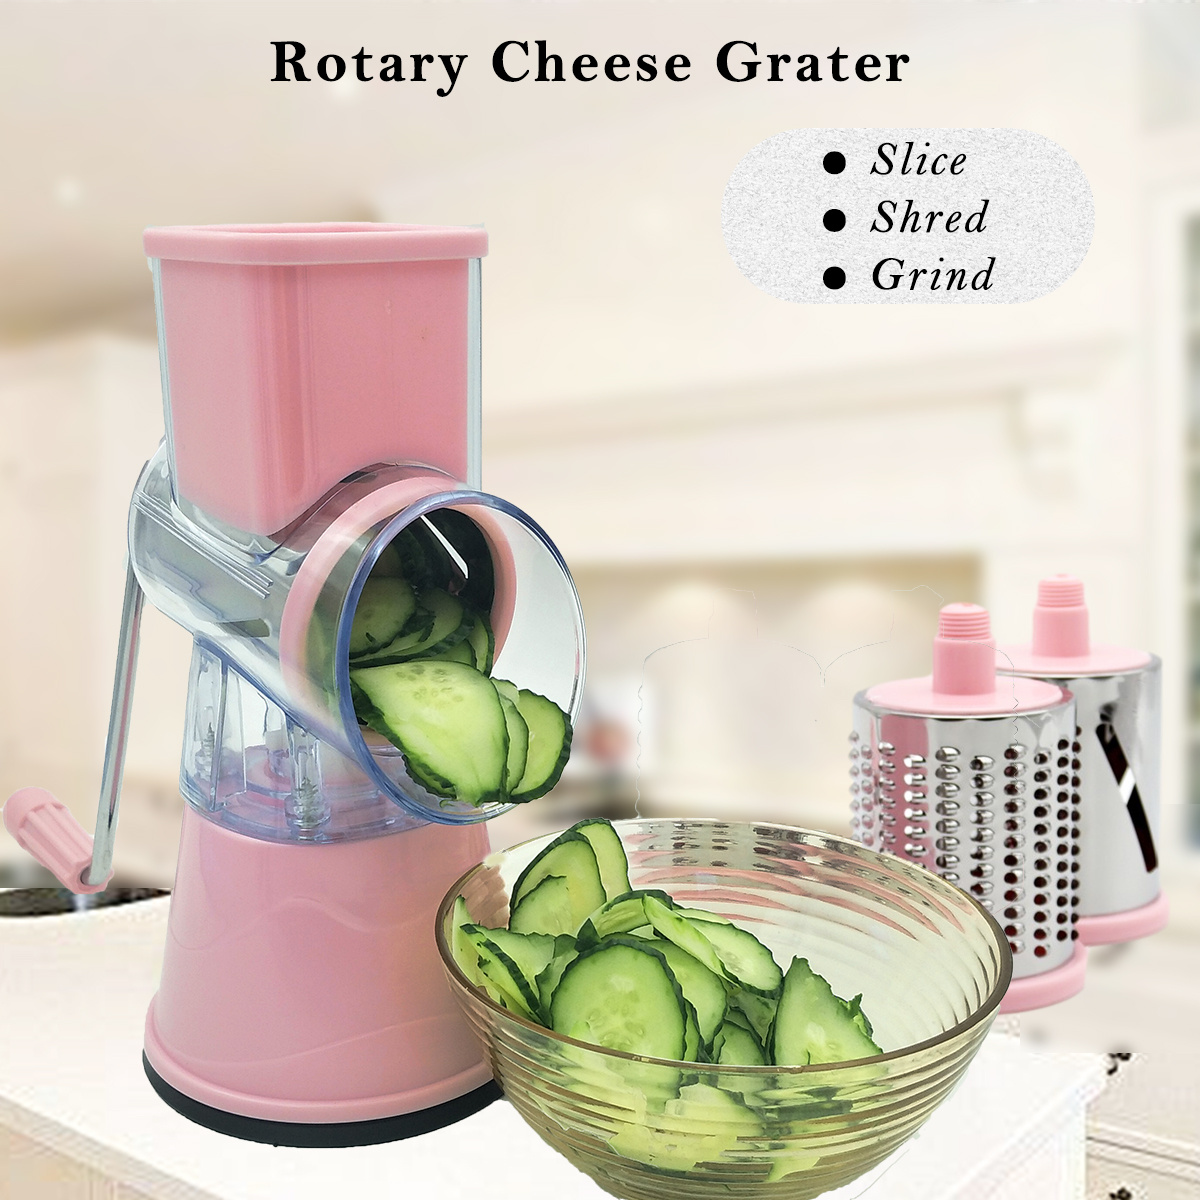 6-in-1 Mandoline Slicer, Cheese Grater, Food Chopper, Food Processors  Kitchen Accessories, 1 - Foods Co.